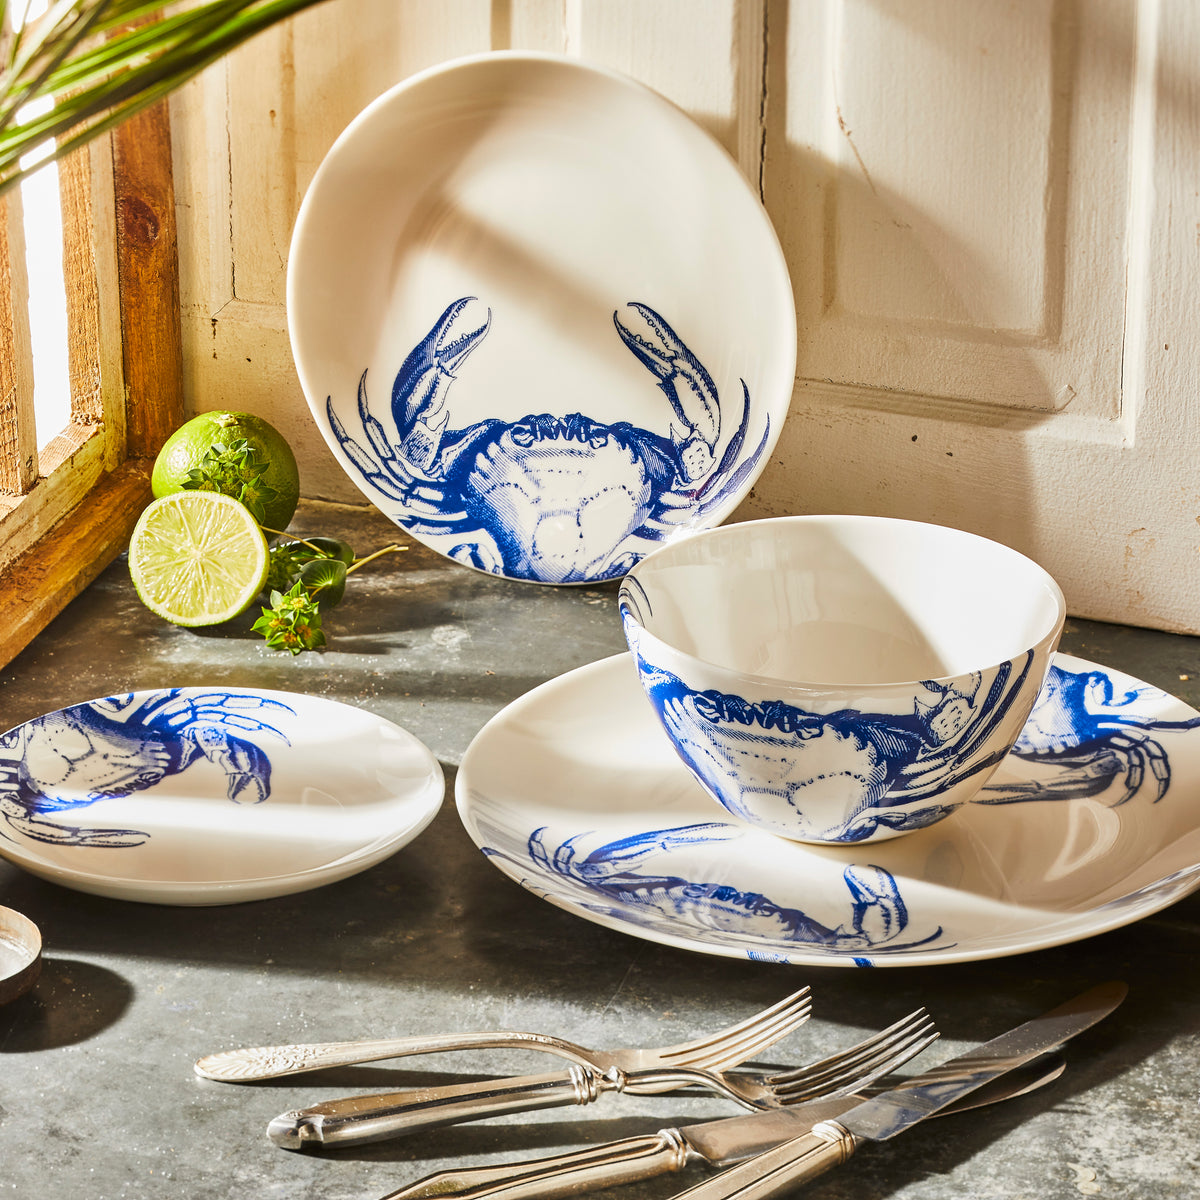 A set of heirloom-quality white ceramic dishes featuring blue crab patterns, including a large plate, bowl, and side plate, is displayed on a gray surface near a window with limes and cutlery beside them. The Crab Small Plates by Caskata Artisanal Home add an elegant touch to the display.